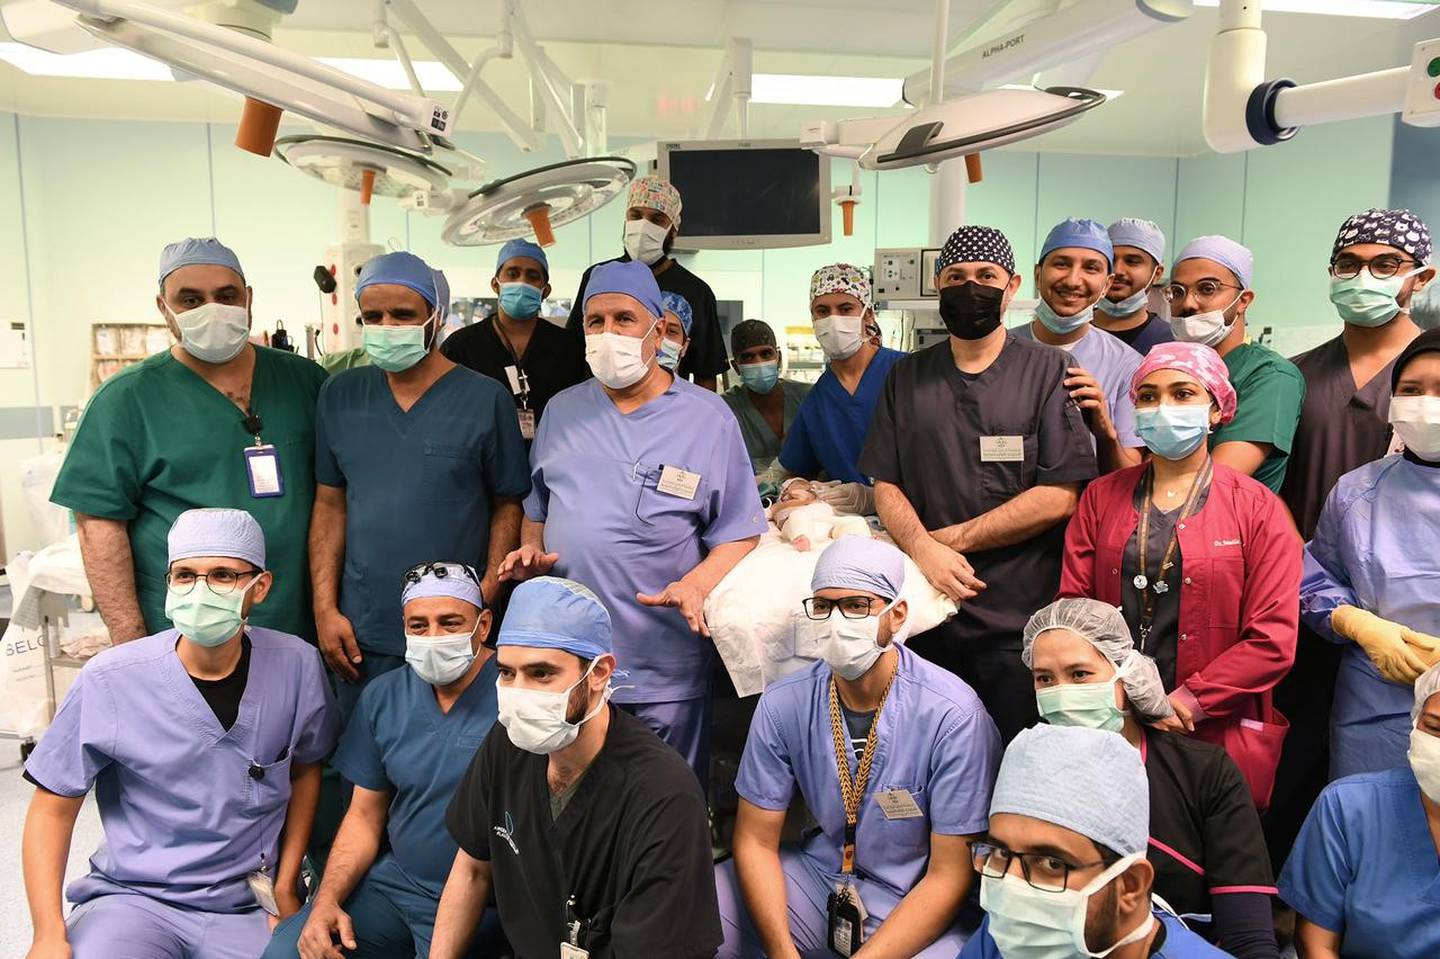 The medical team in charge of the operation on Aisha at King Abdullah Specialised Children's Hospital, Riyadh, Saudi Arabia